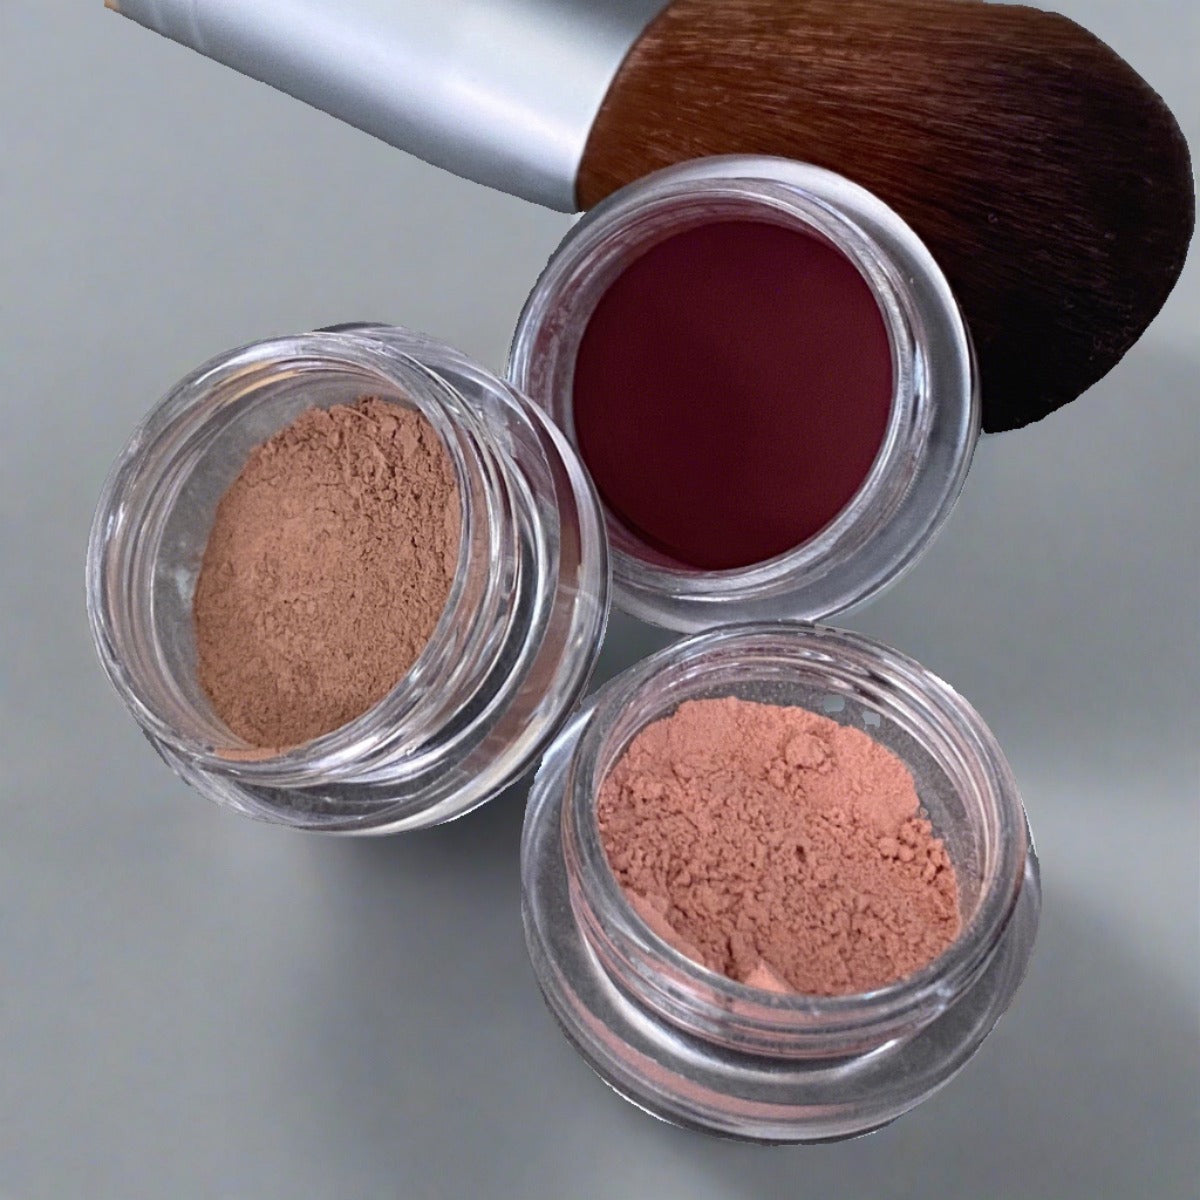 Your choice of long-lasting, highly-pigmented blush trial sizes